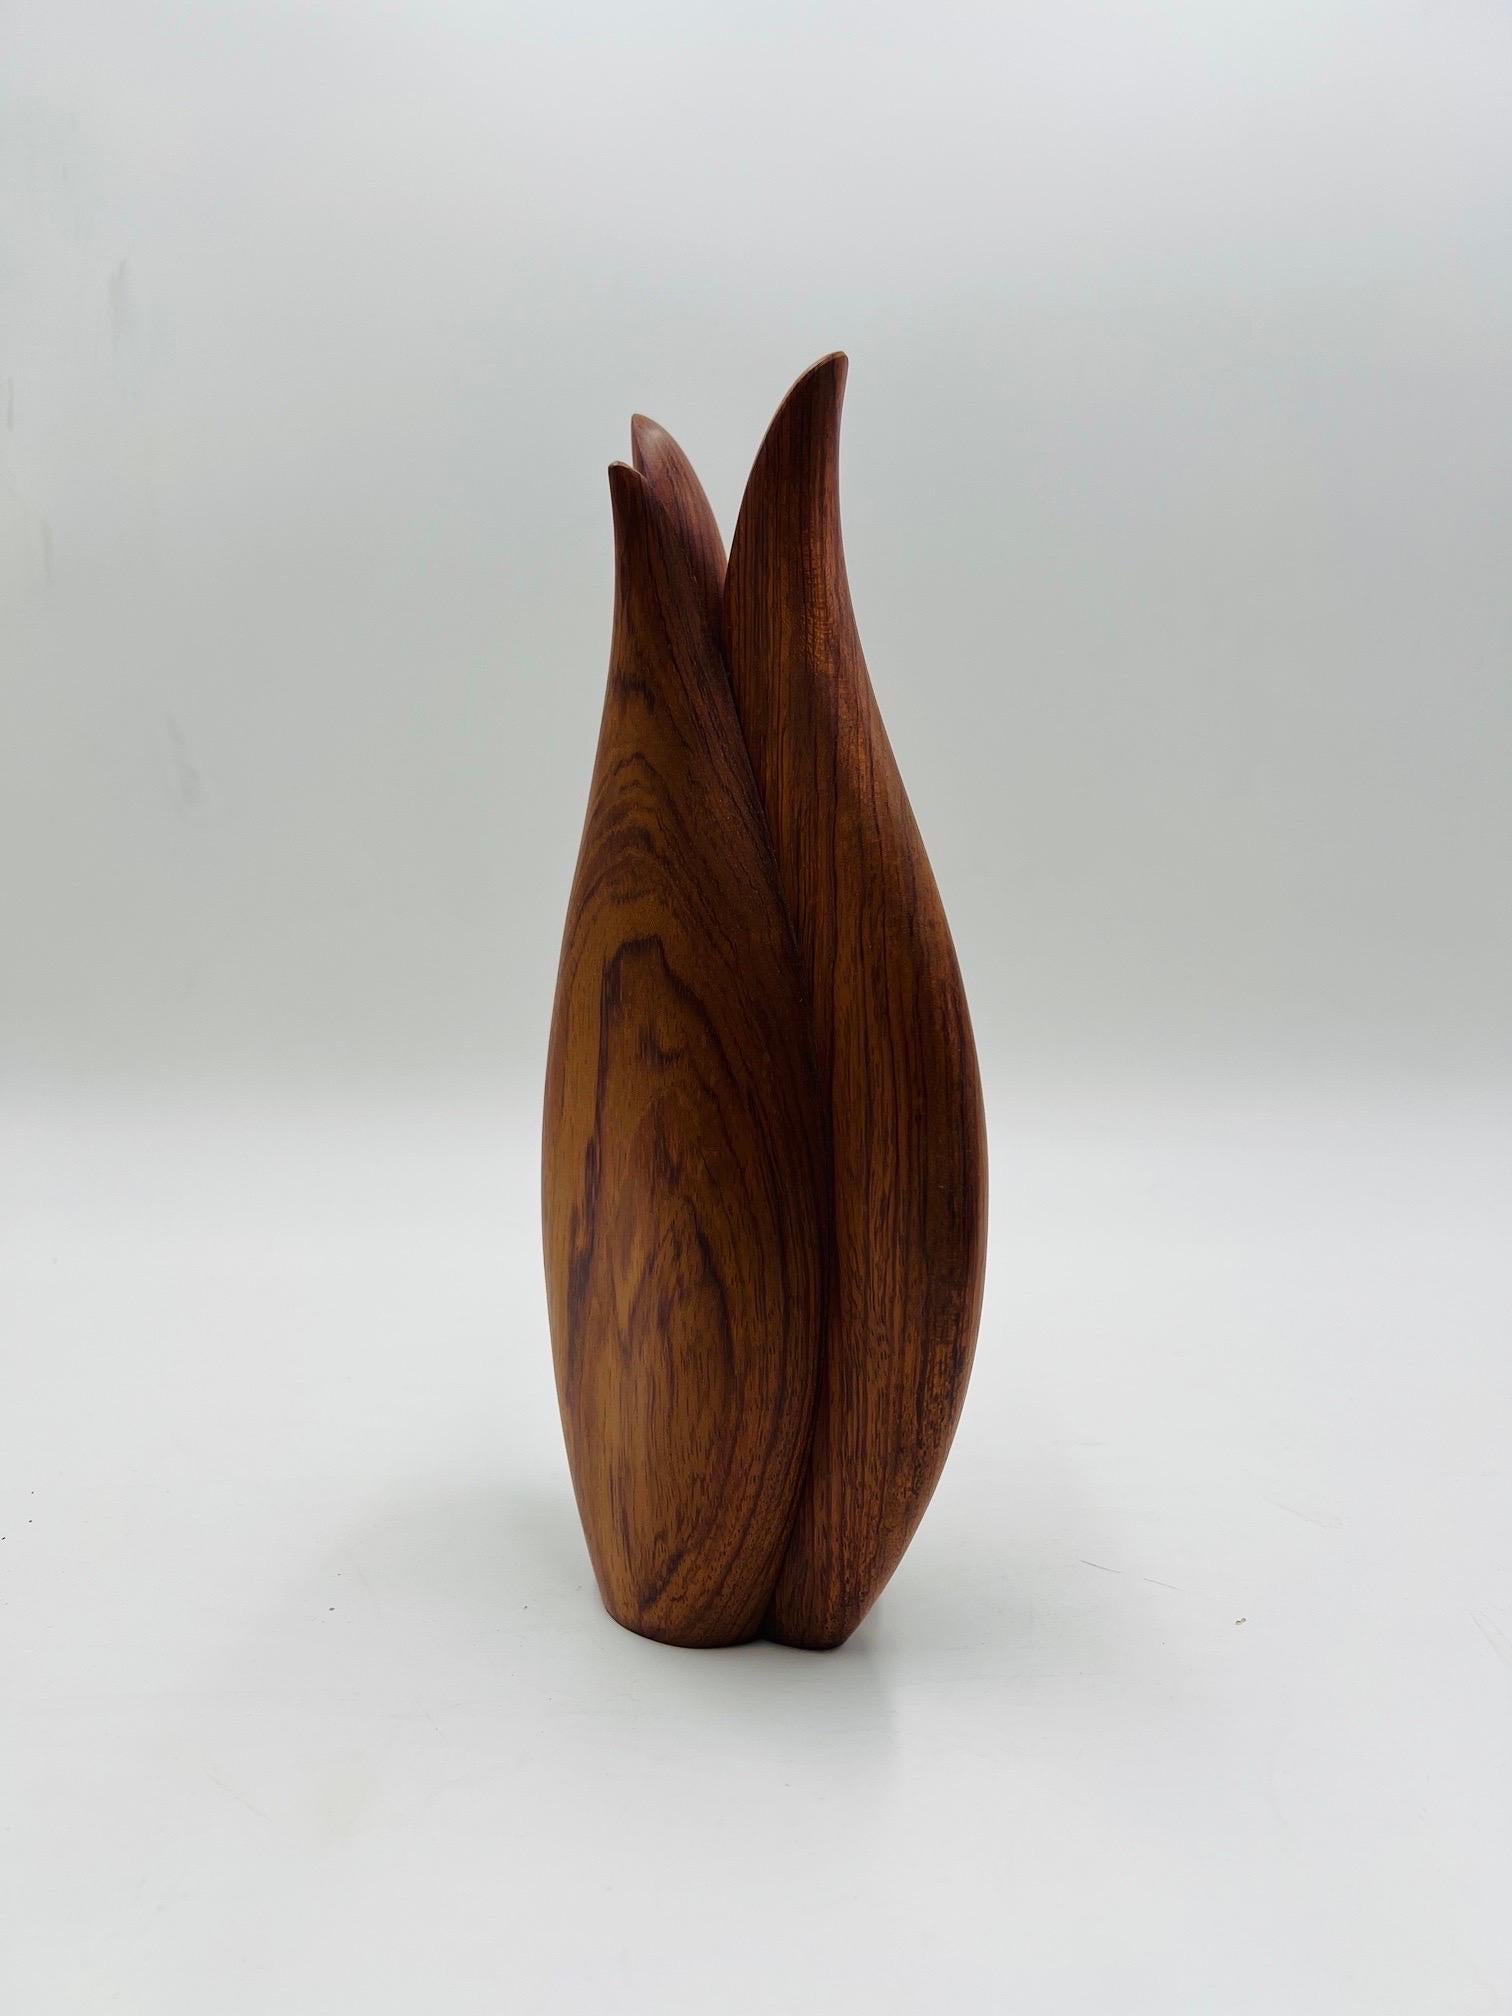 Vintage modern style studio quality vase featured in teak wood. Shows beautifully in a modern or traditional setting.